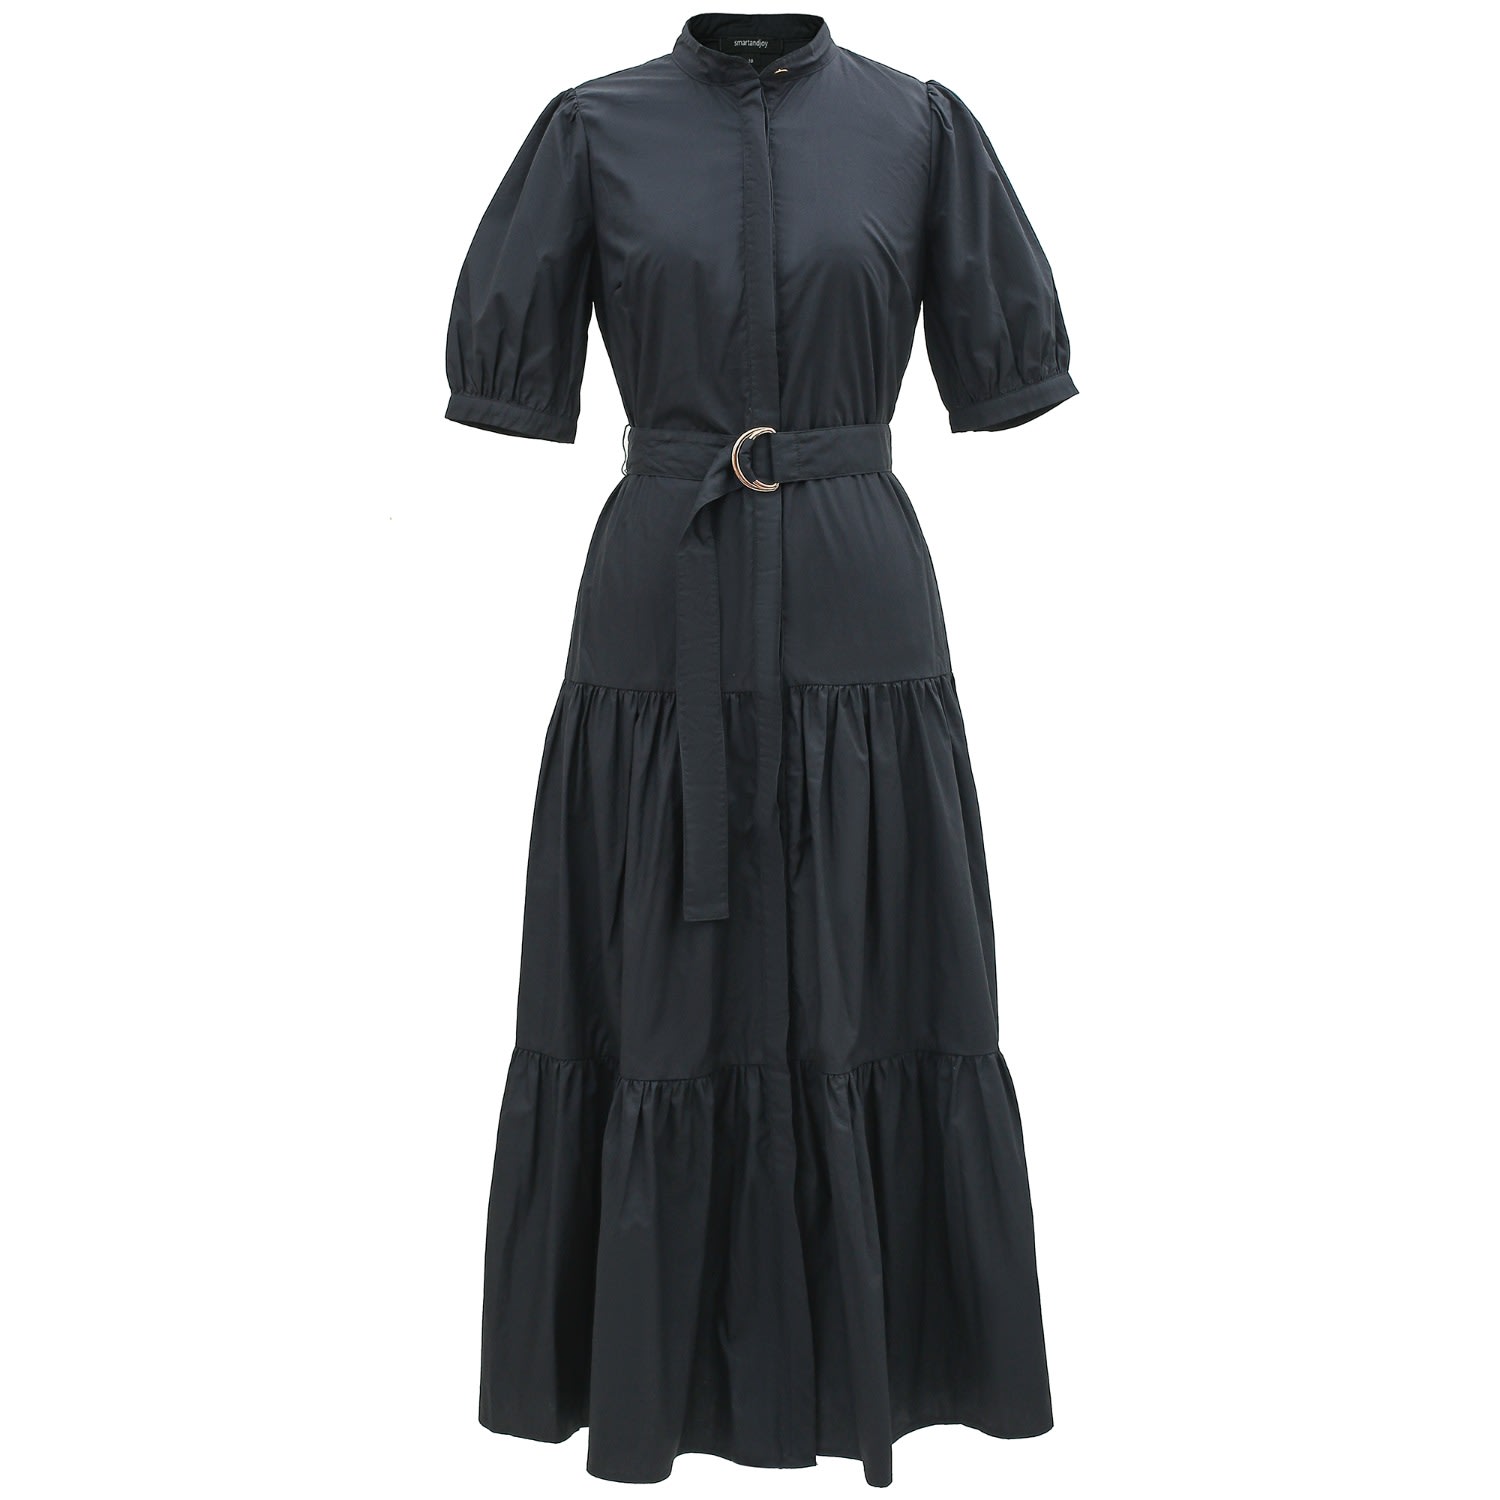 Women’s Black Cotton Shirt Dress With Added Belt Extra Small Smart and Joy